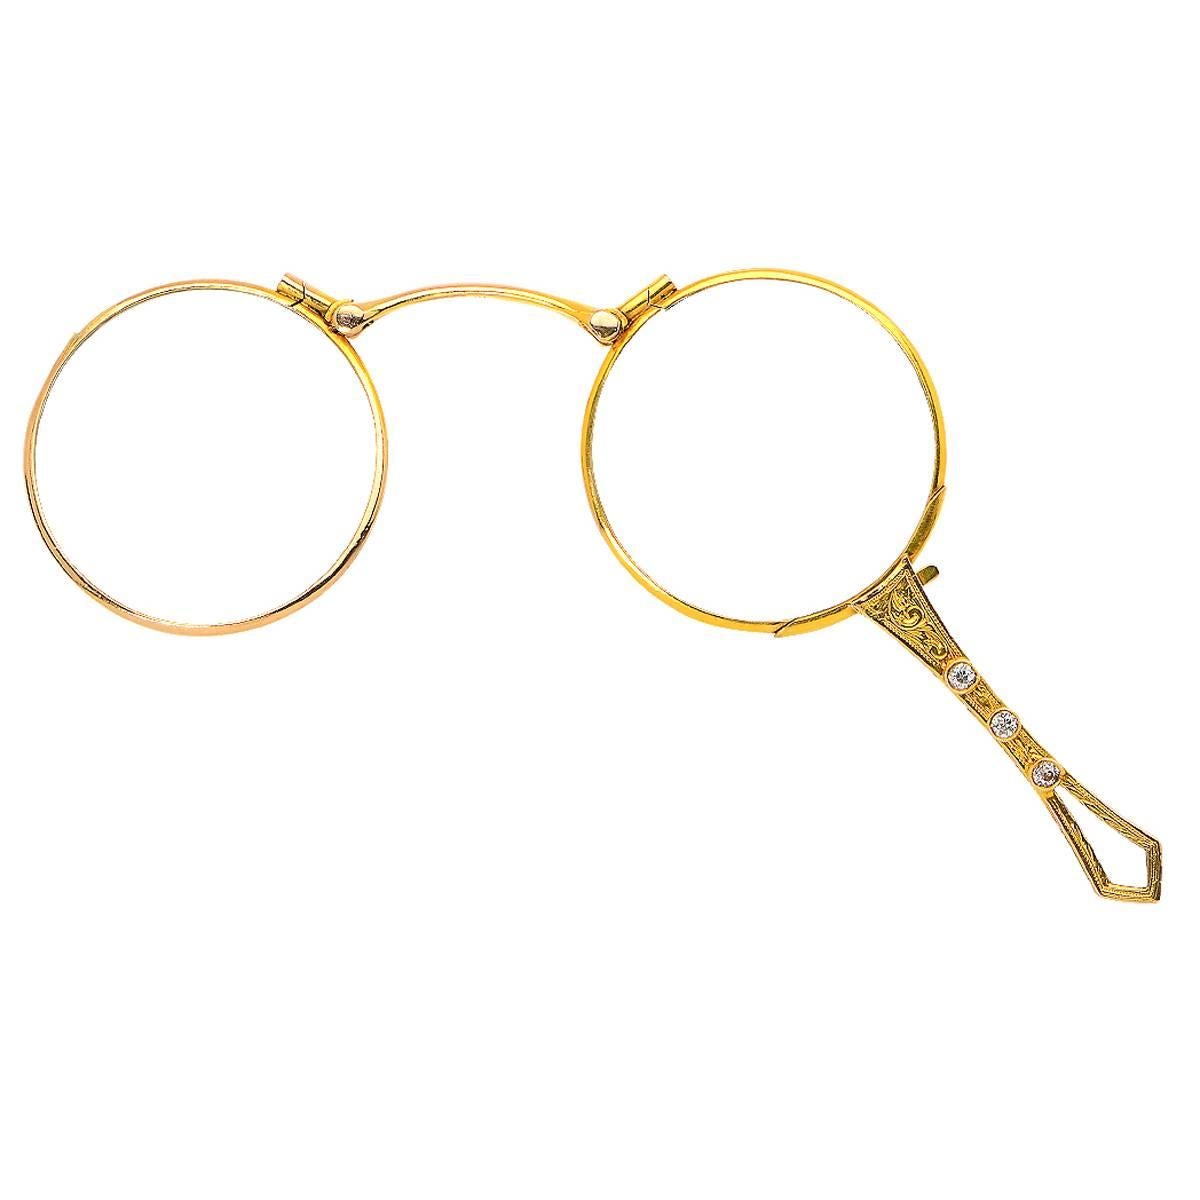 10 Karat Yellow Gold Vintage Diamond Eye Glasses Featuring 6 Old European Cut Diamonds Weighing Approximately .72 Carats Total, G Color, SI Clarity.